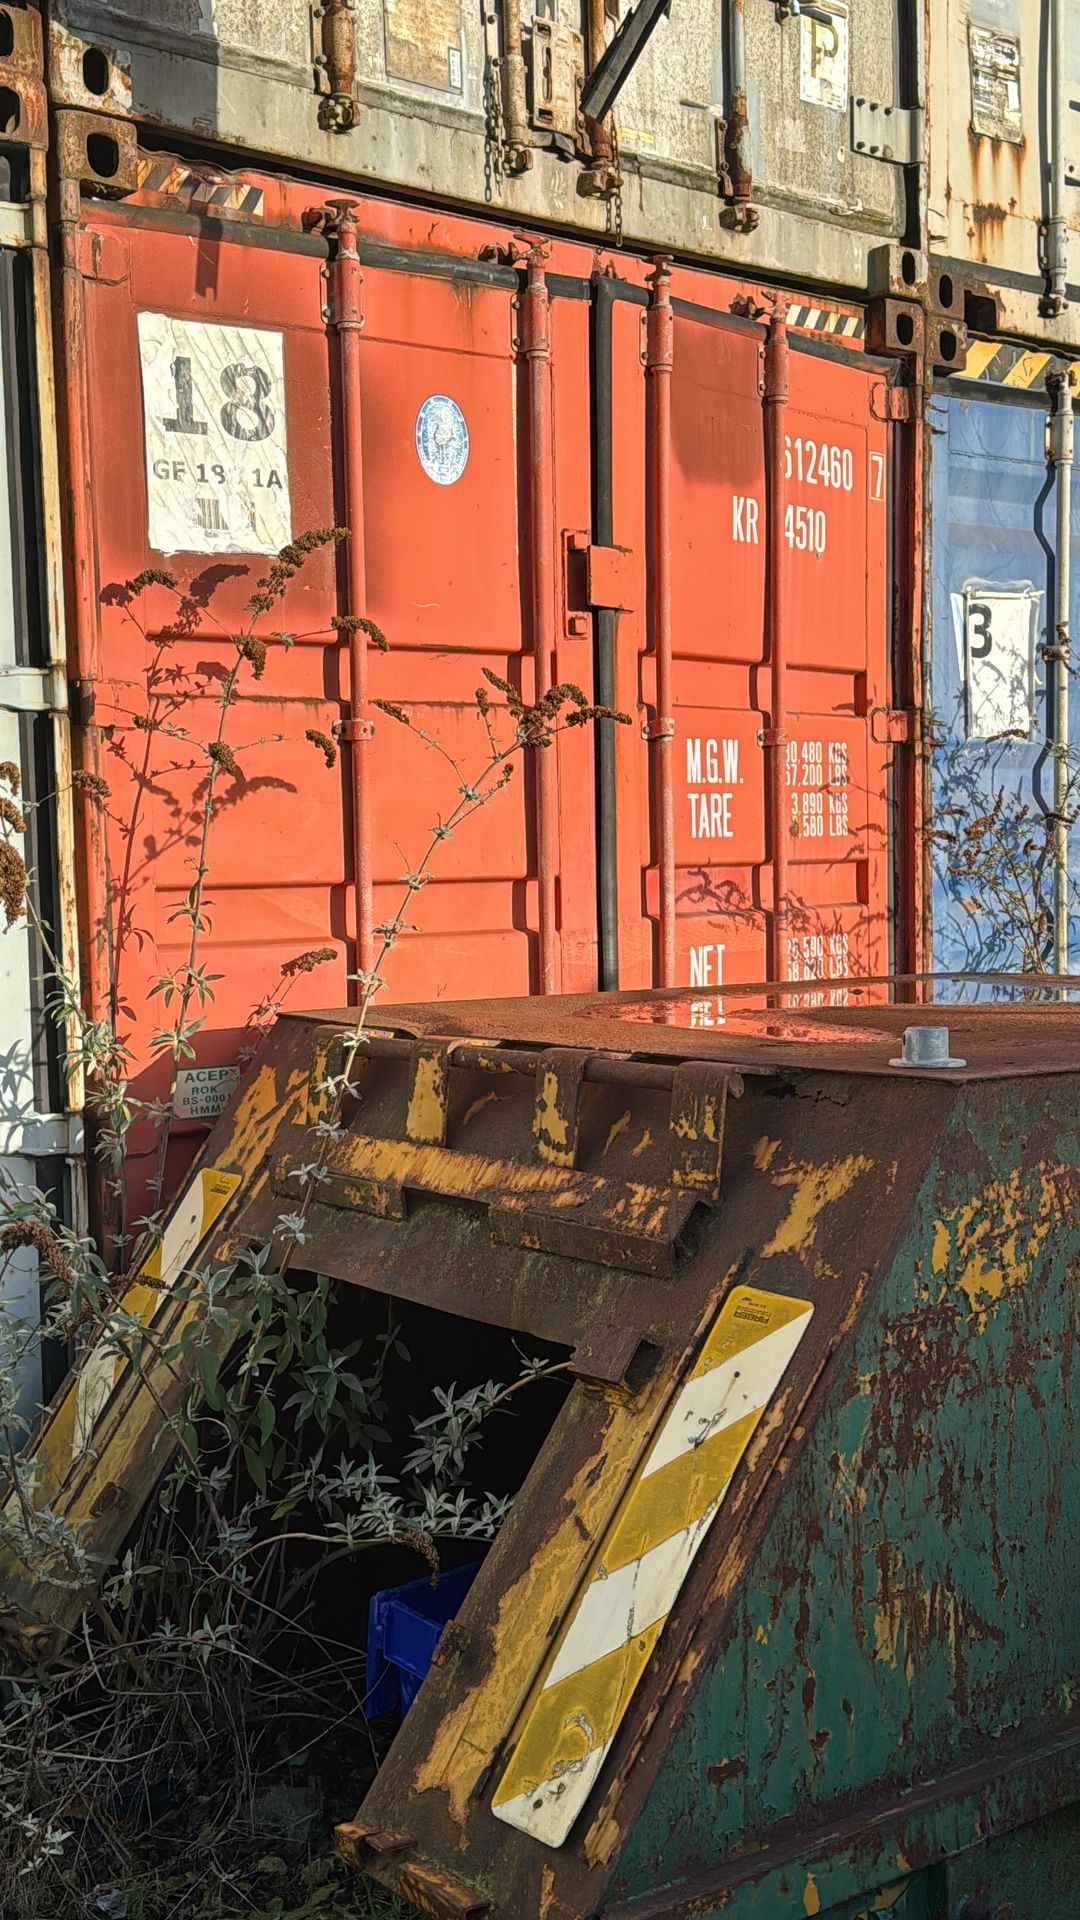 Shipping container, 43 (6124607KR4510)